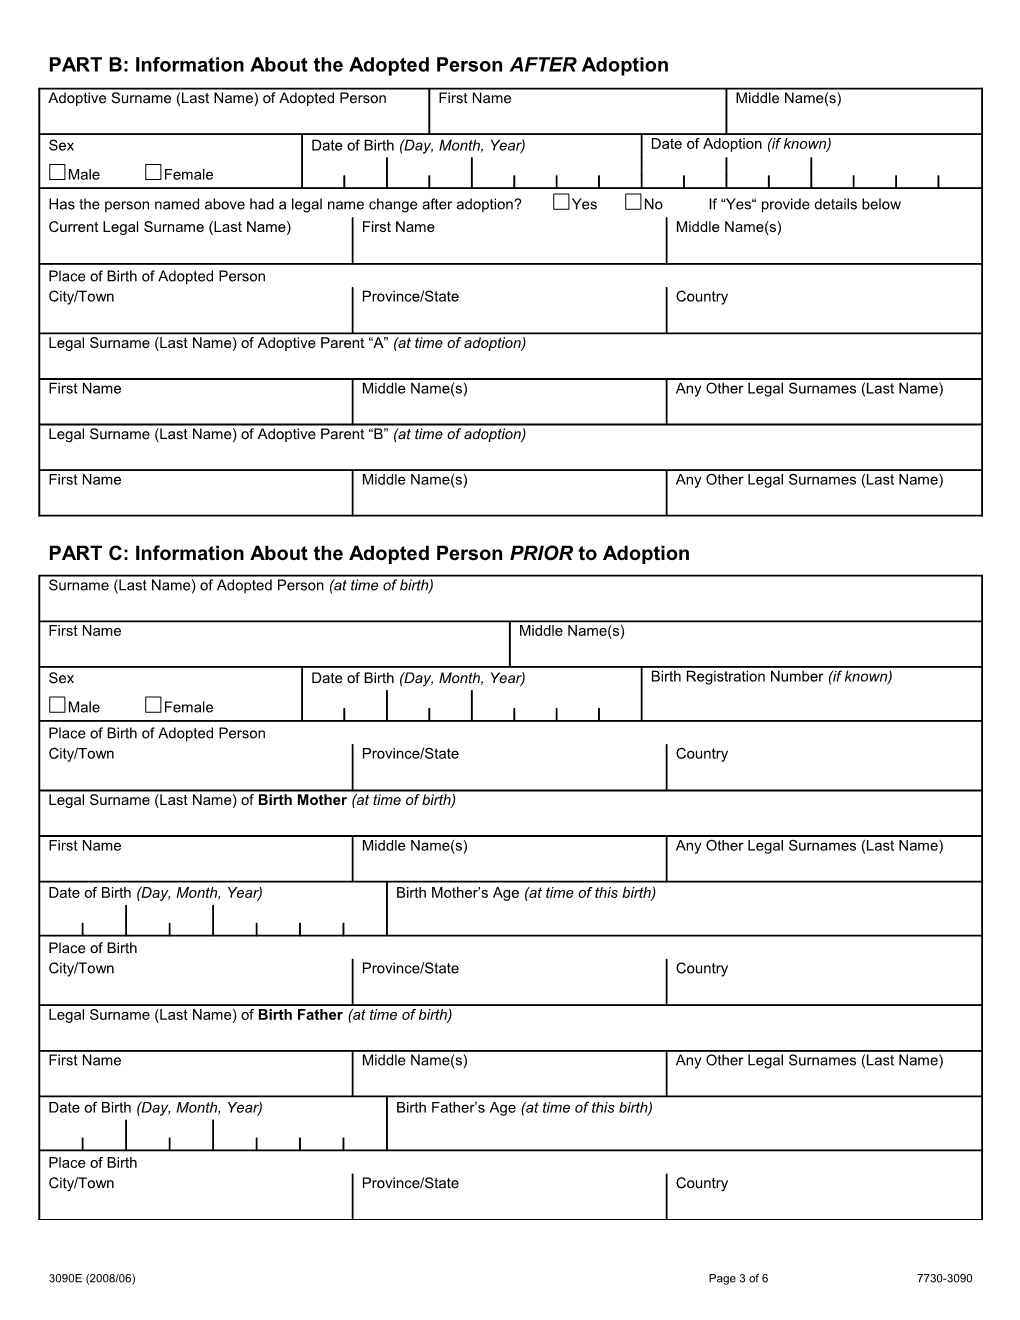 Adopted Person's Application